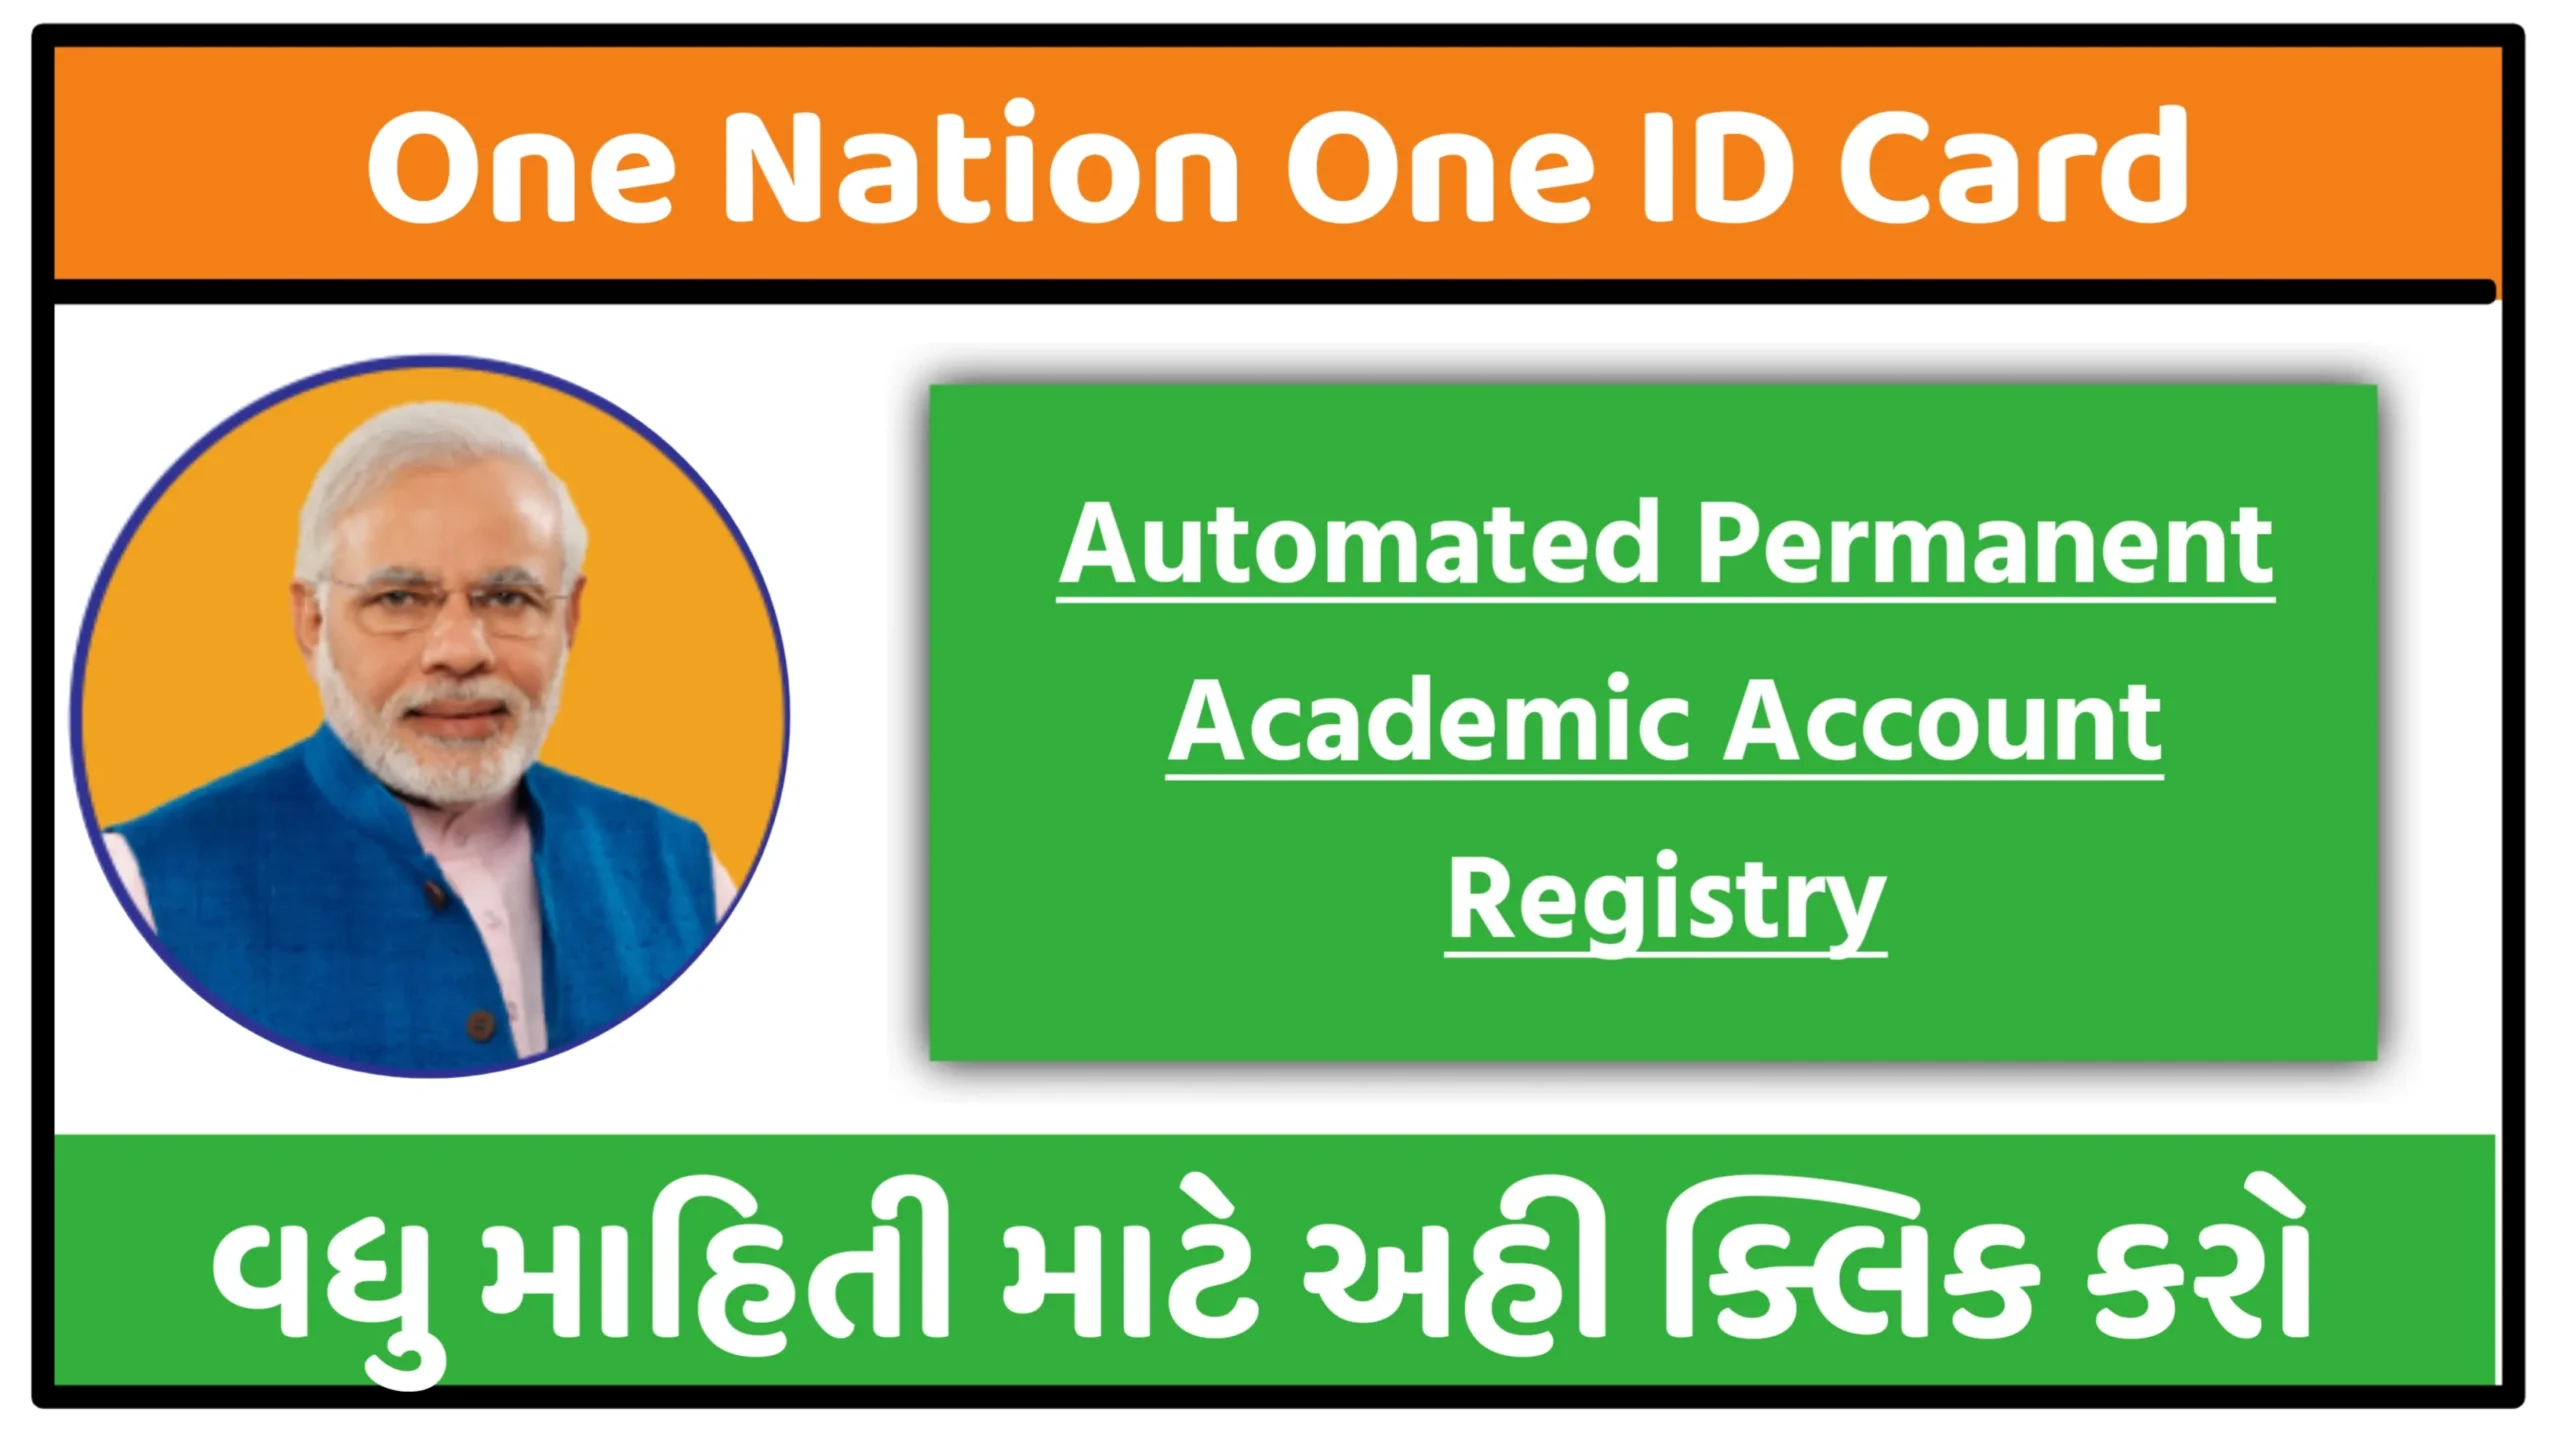 One Nation One ID card